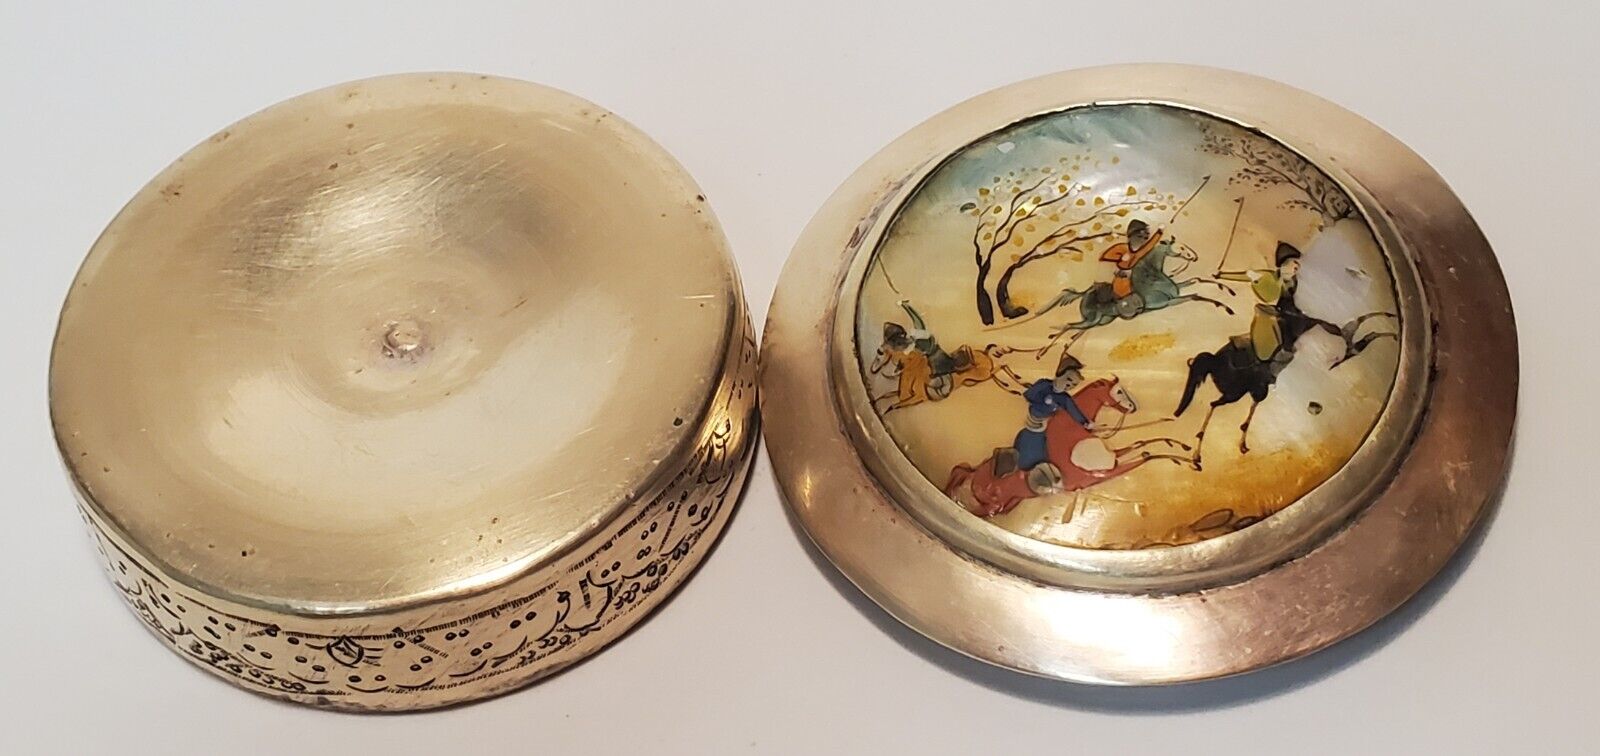 Antique Brass Persian Snuff Box or Pill Box. Lid is Hand Painted using the Pearl